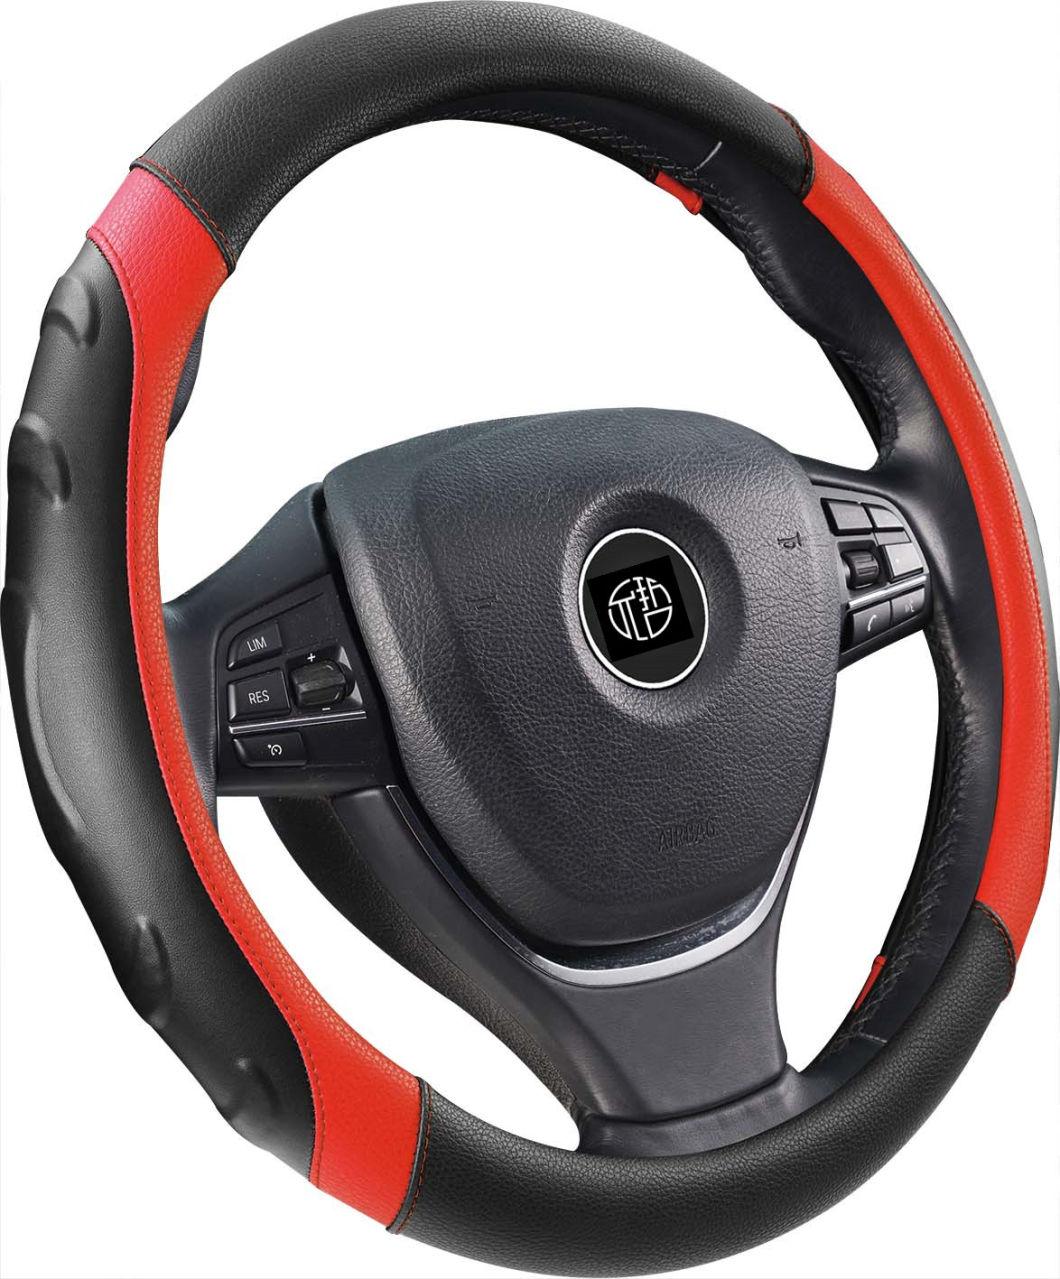 PVC Both Female&Male Customized Accepted Covers Leather Steering Wheel Cover